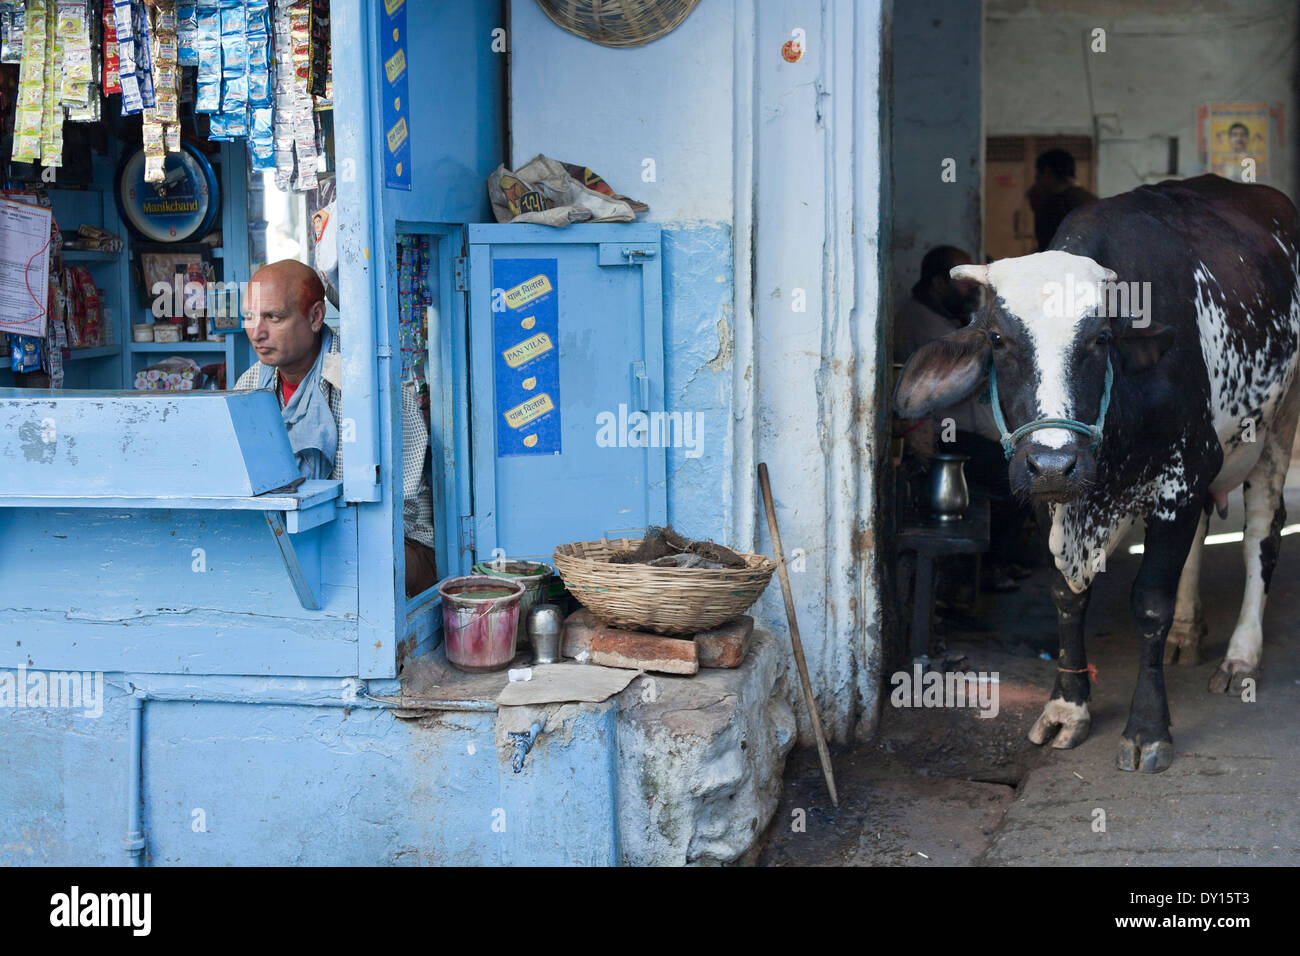 Udaipur, Rajasthan, India.. Corner shop and sacred cow in the street Stock Photo